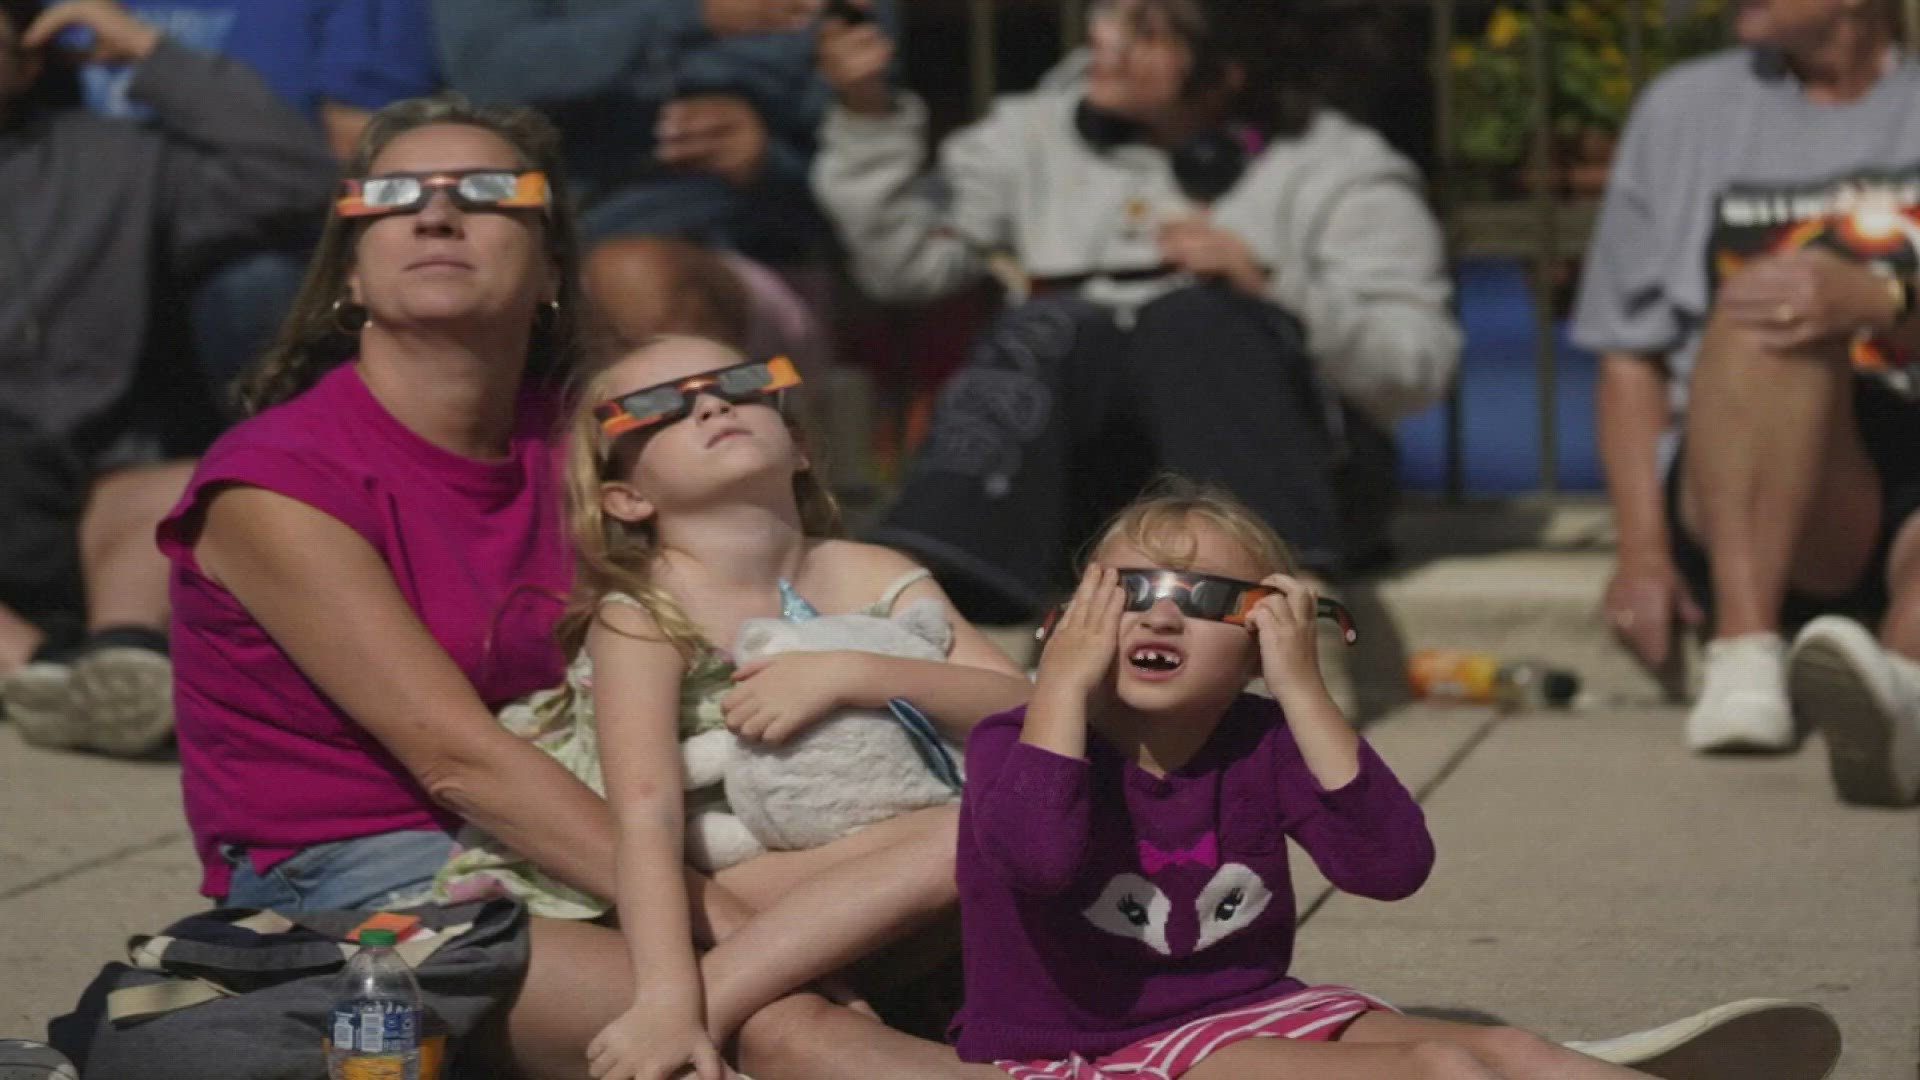 Thousands are visiting cities in the path of totality during the Great American Eclipse.